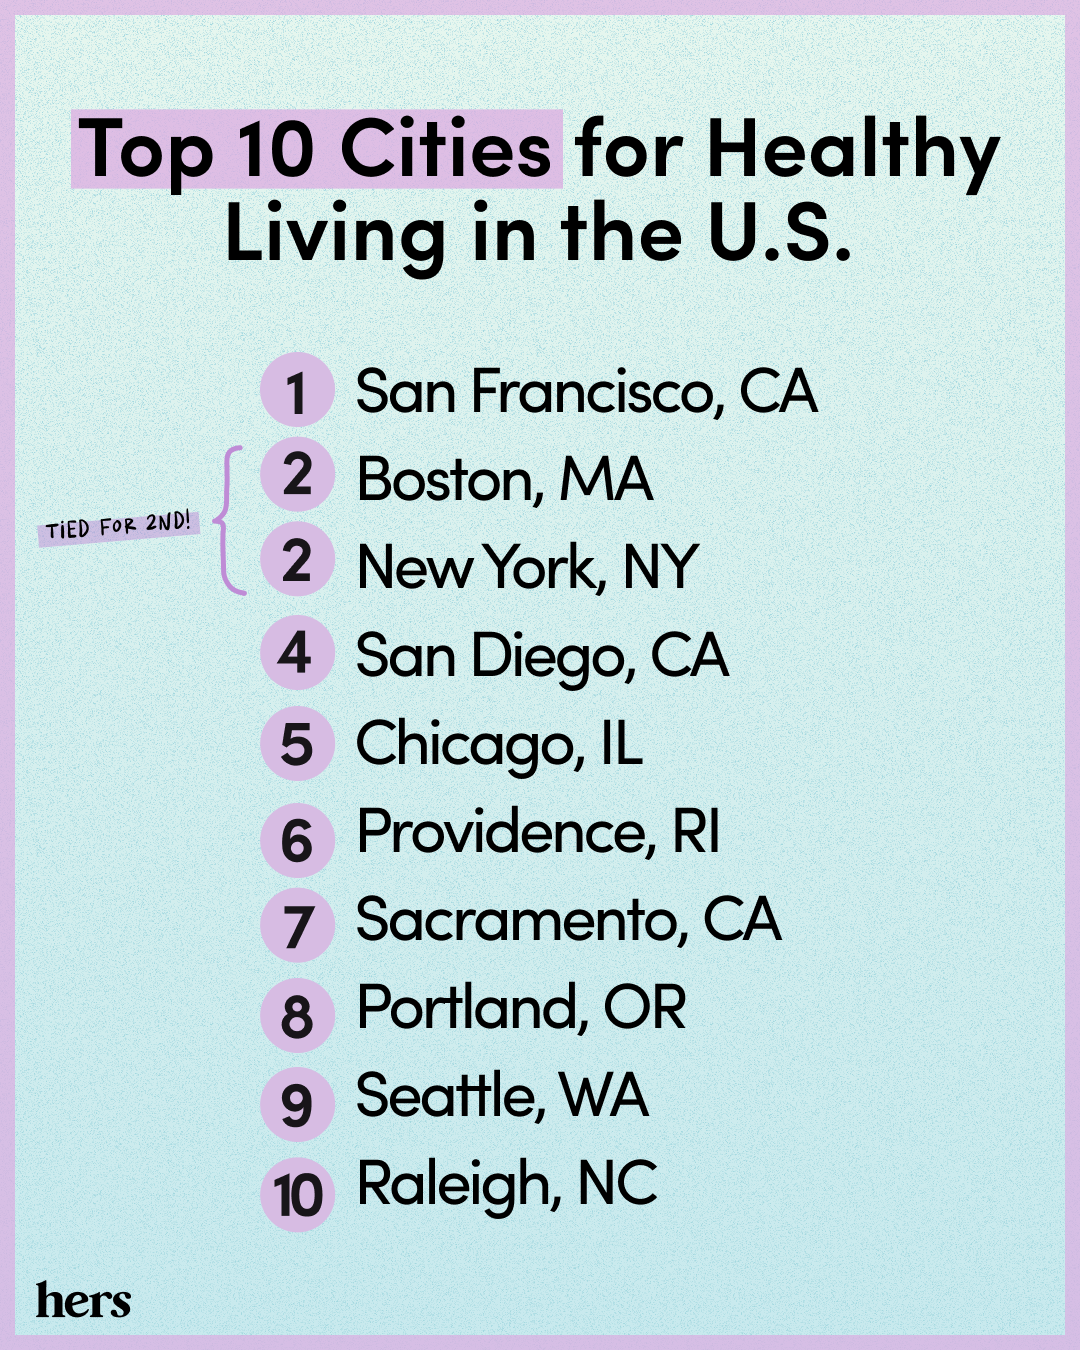 List of Top 10 Cities for Healthy Living in the U.S.